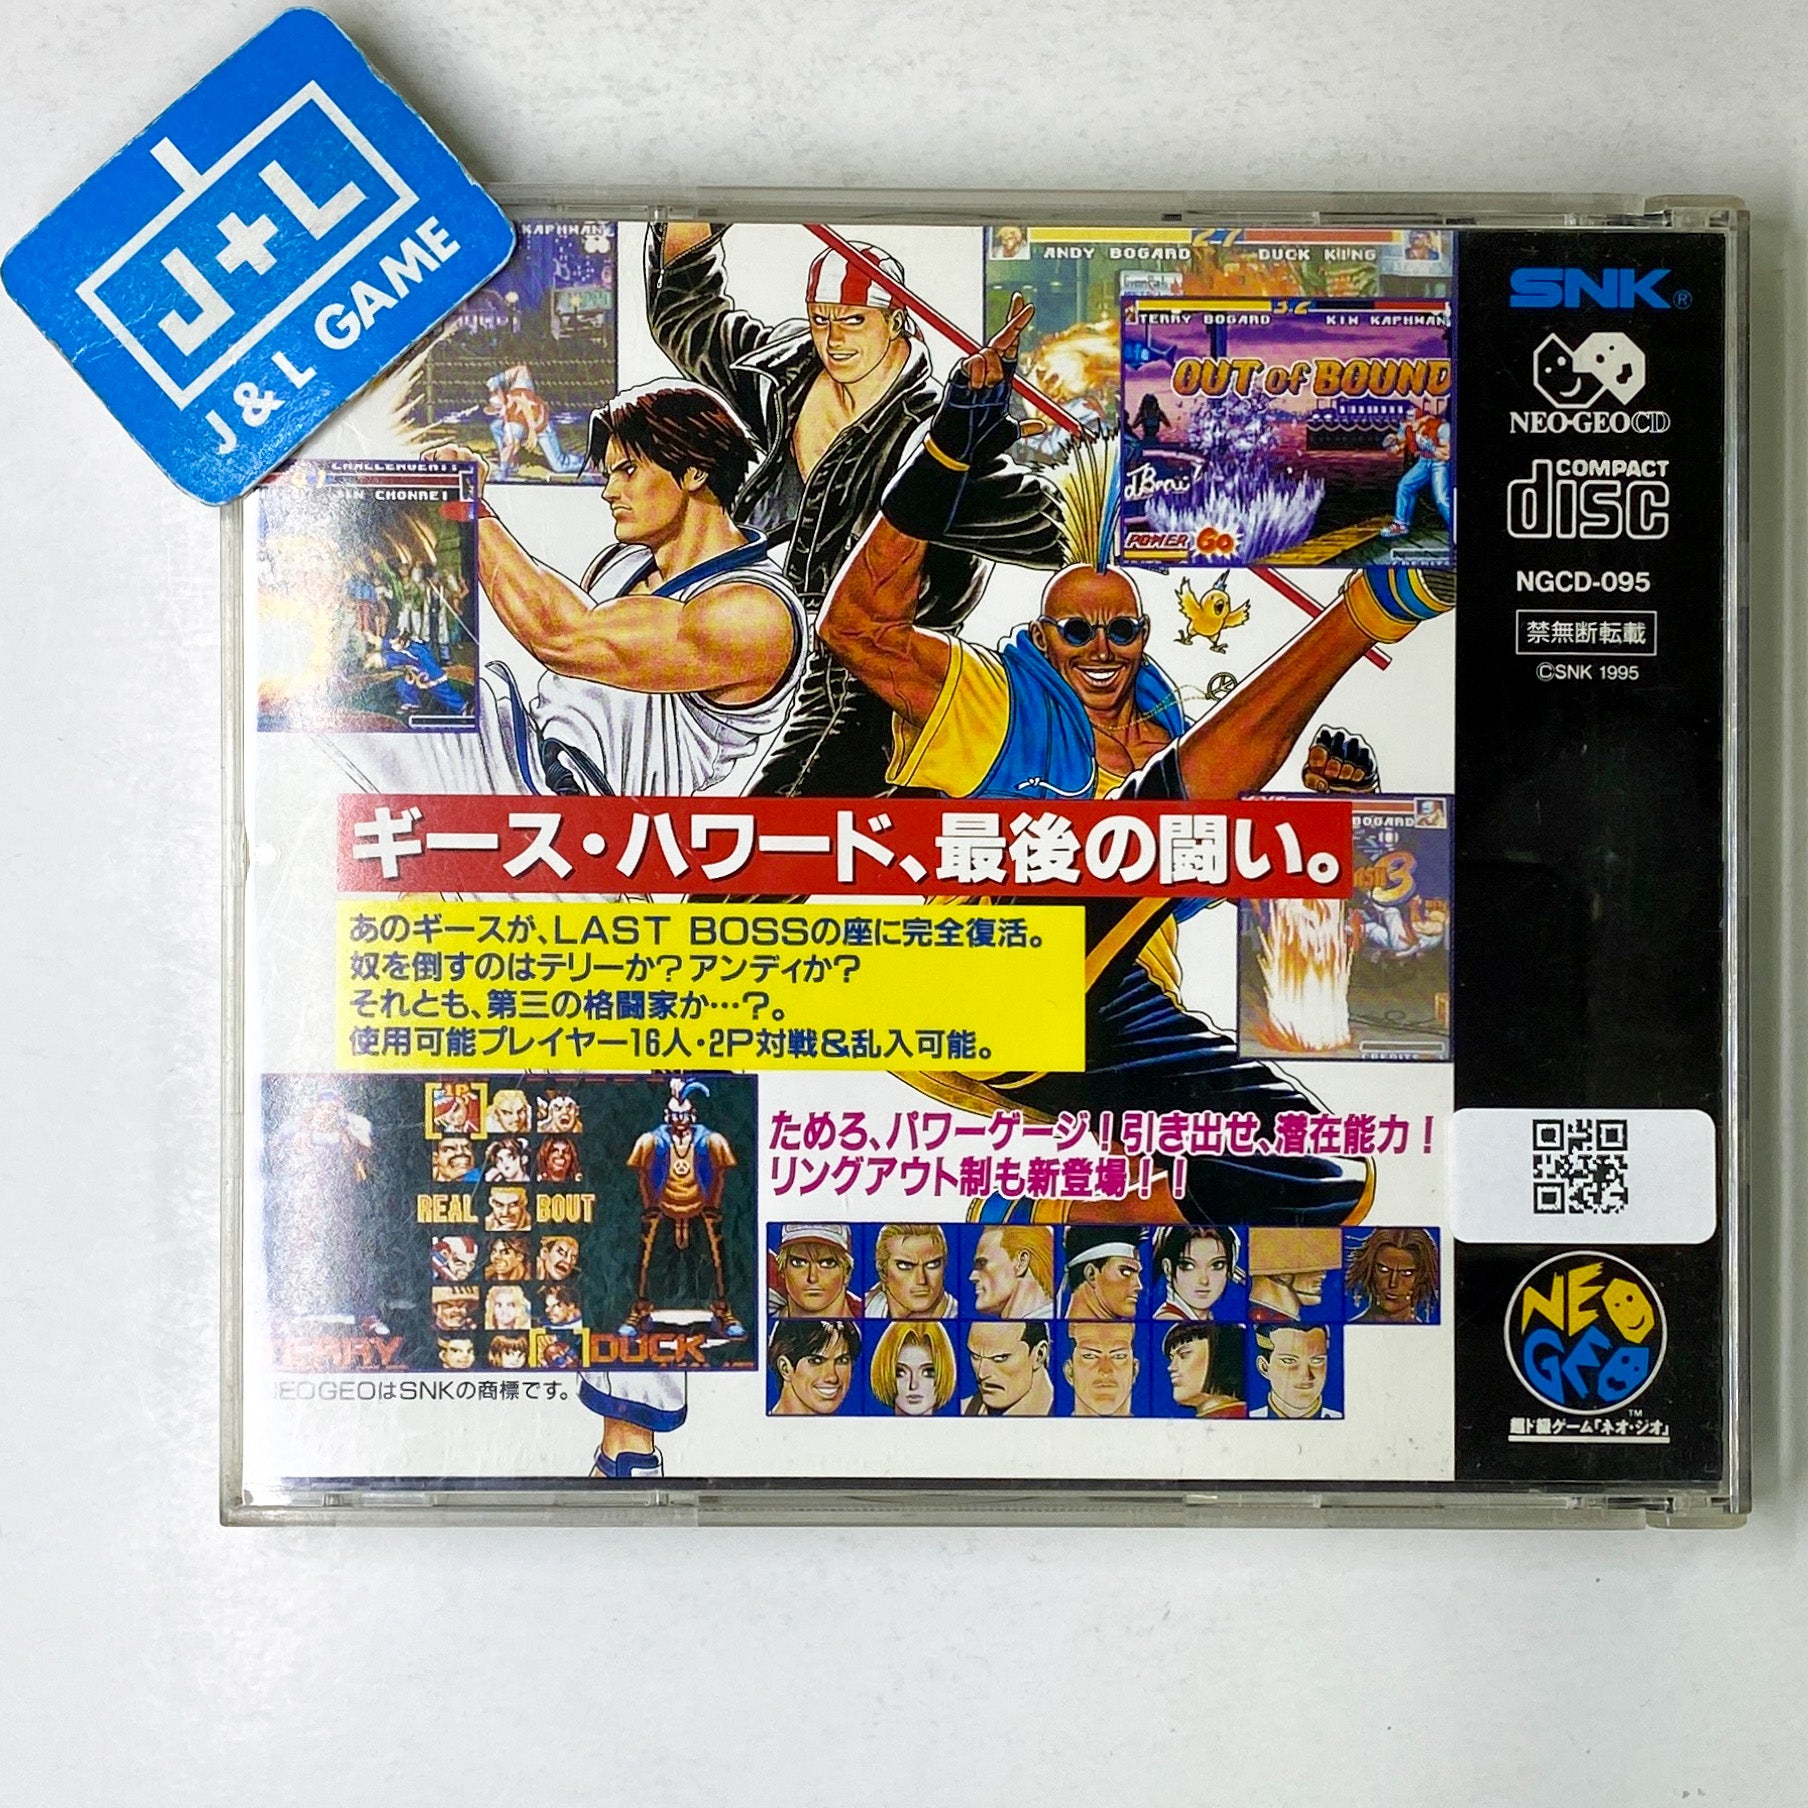 Real Bout Garou Densetsu - SNK NeoGeo CD (Japanese Import) [Pre-Owned] Video Games SNK   